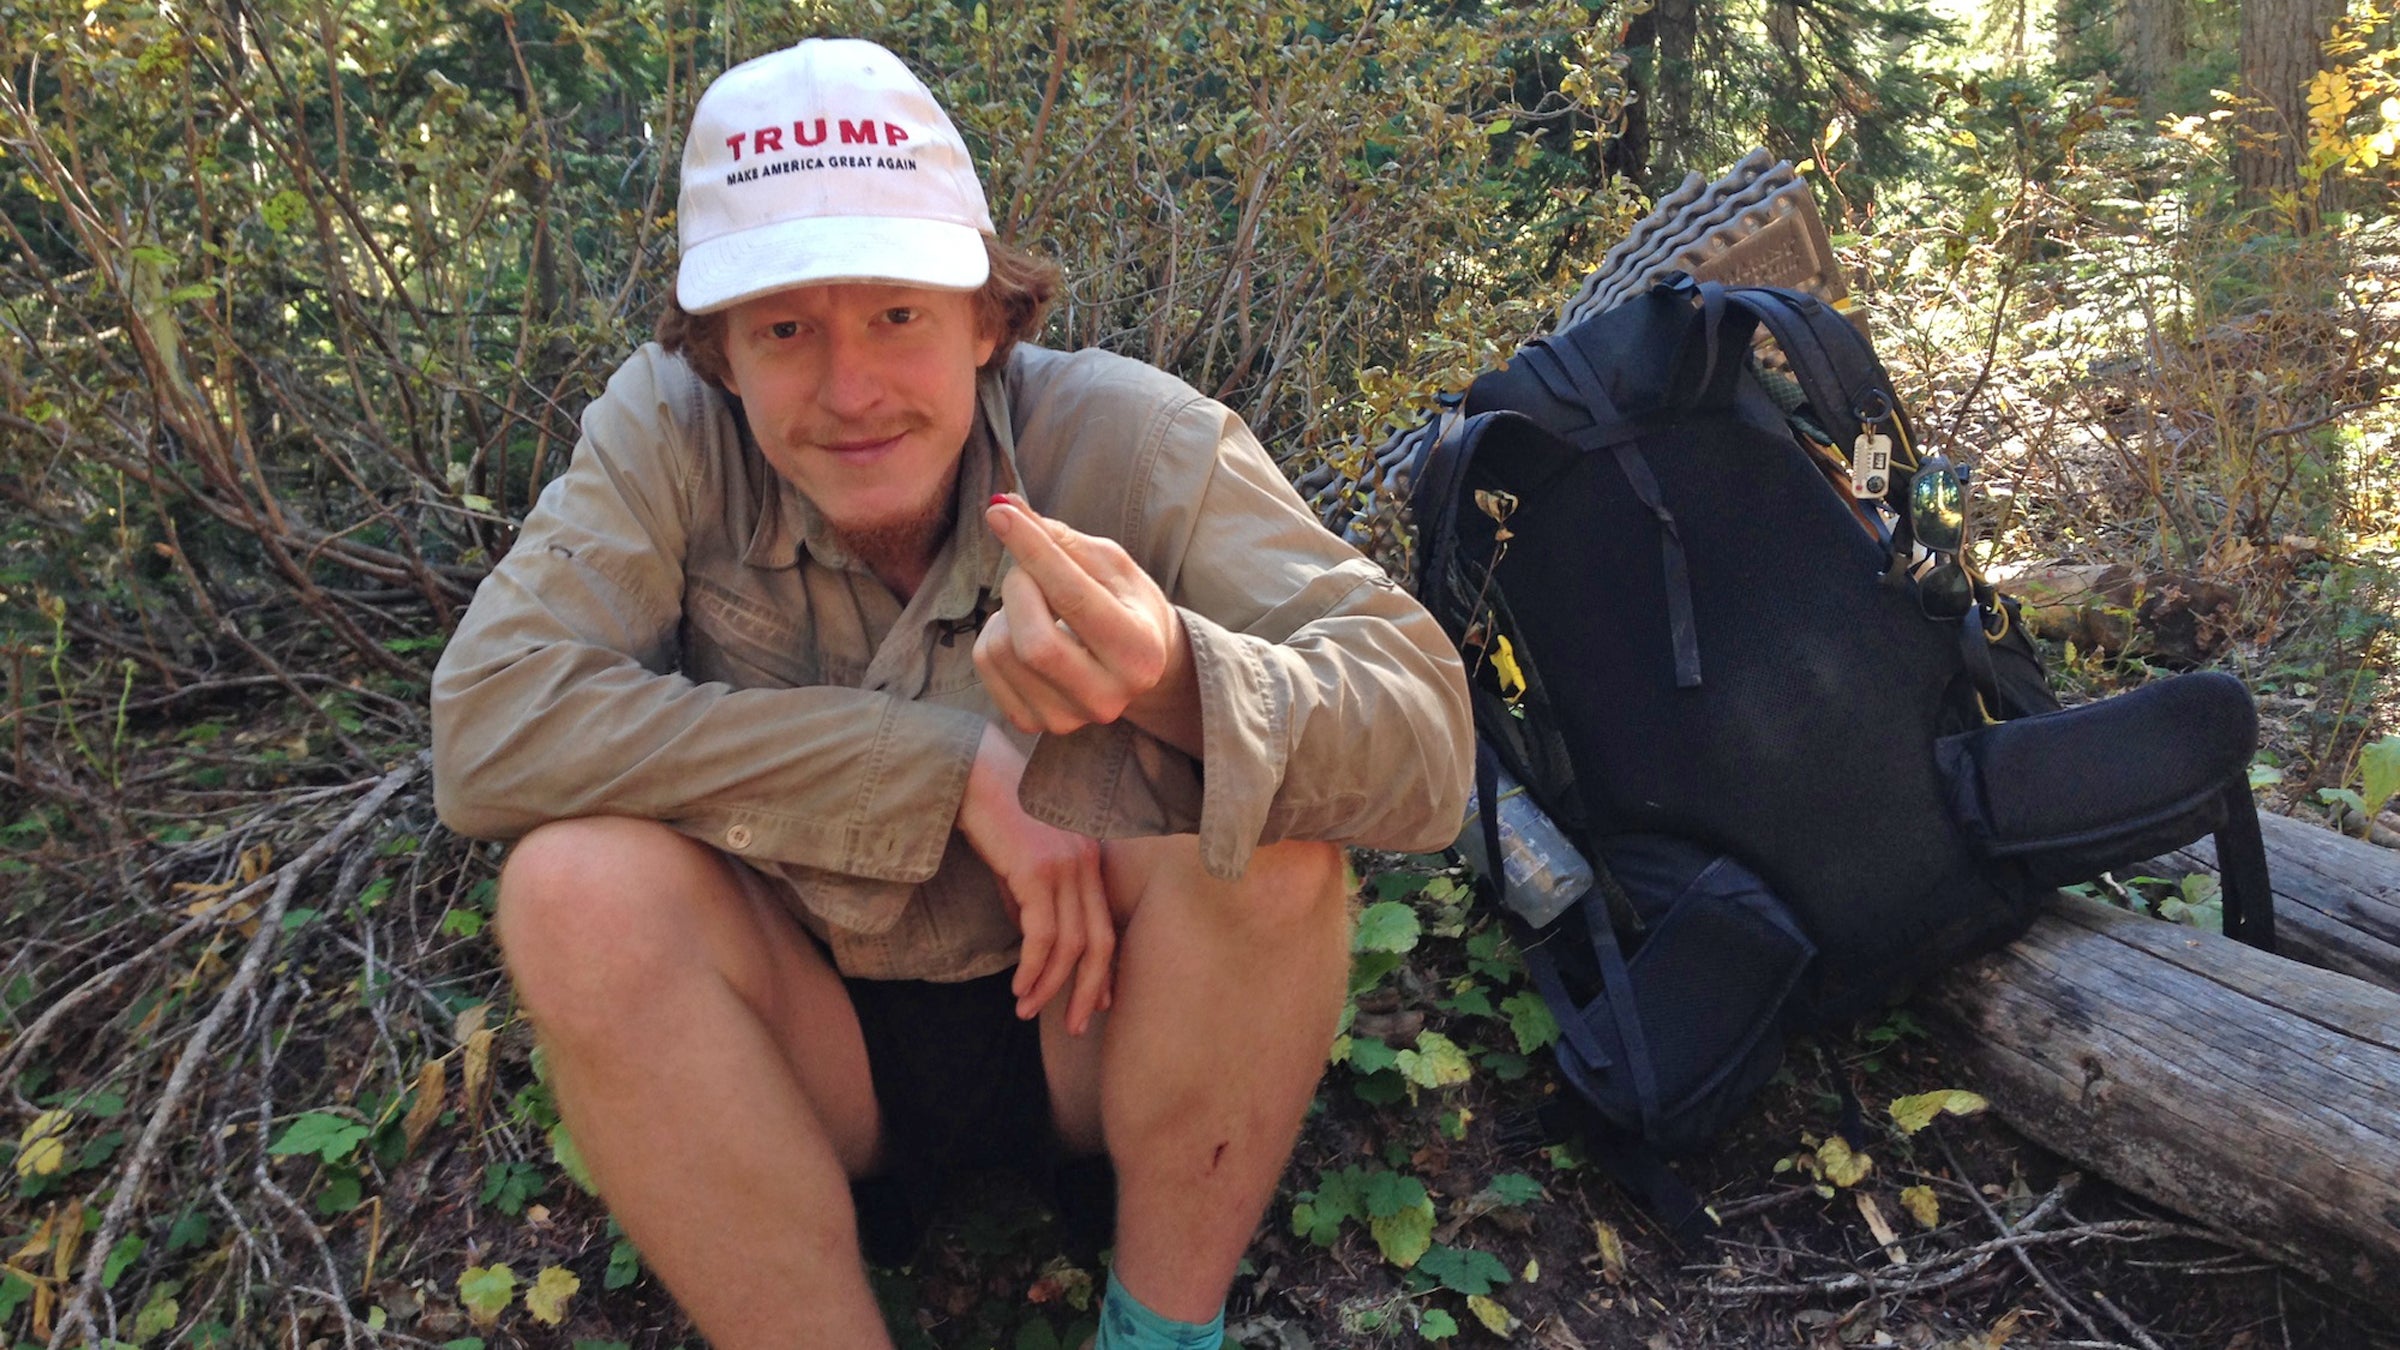 Kyle Hoyt, 30
Trail Name: MAGA
Eugene, Oregon
“I learned about different types of berries. I learned how to be alone and be happy. I’ve learned not to be scared of who you are; if you want to represent something, do it. You’re going to be a lot happier. If you’re afraid, you might regret it later.”